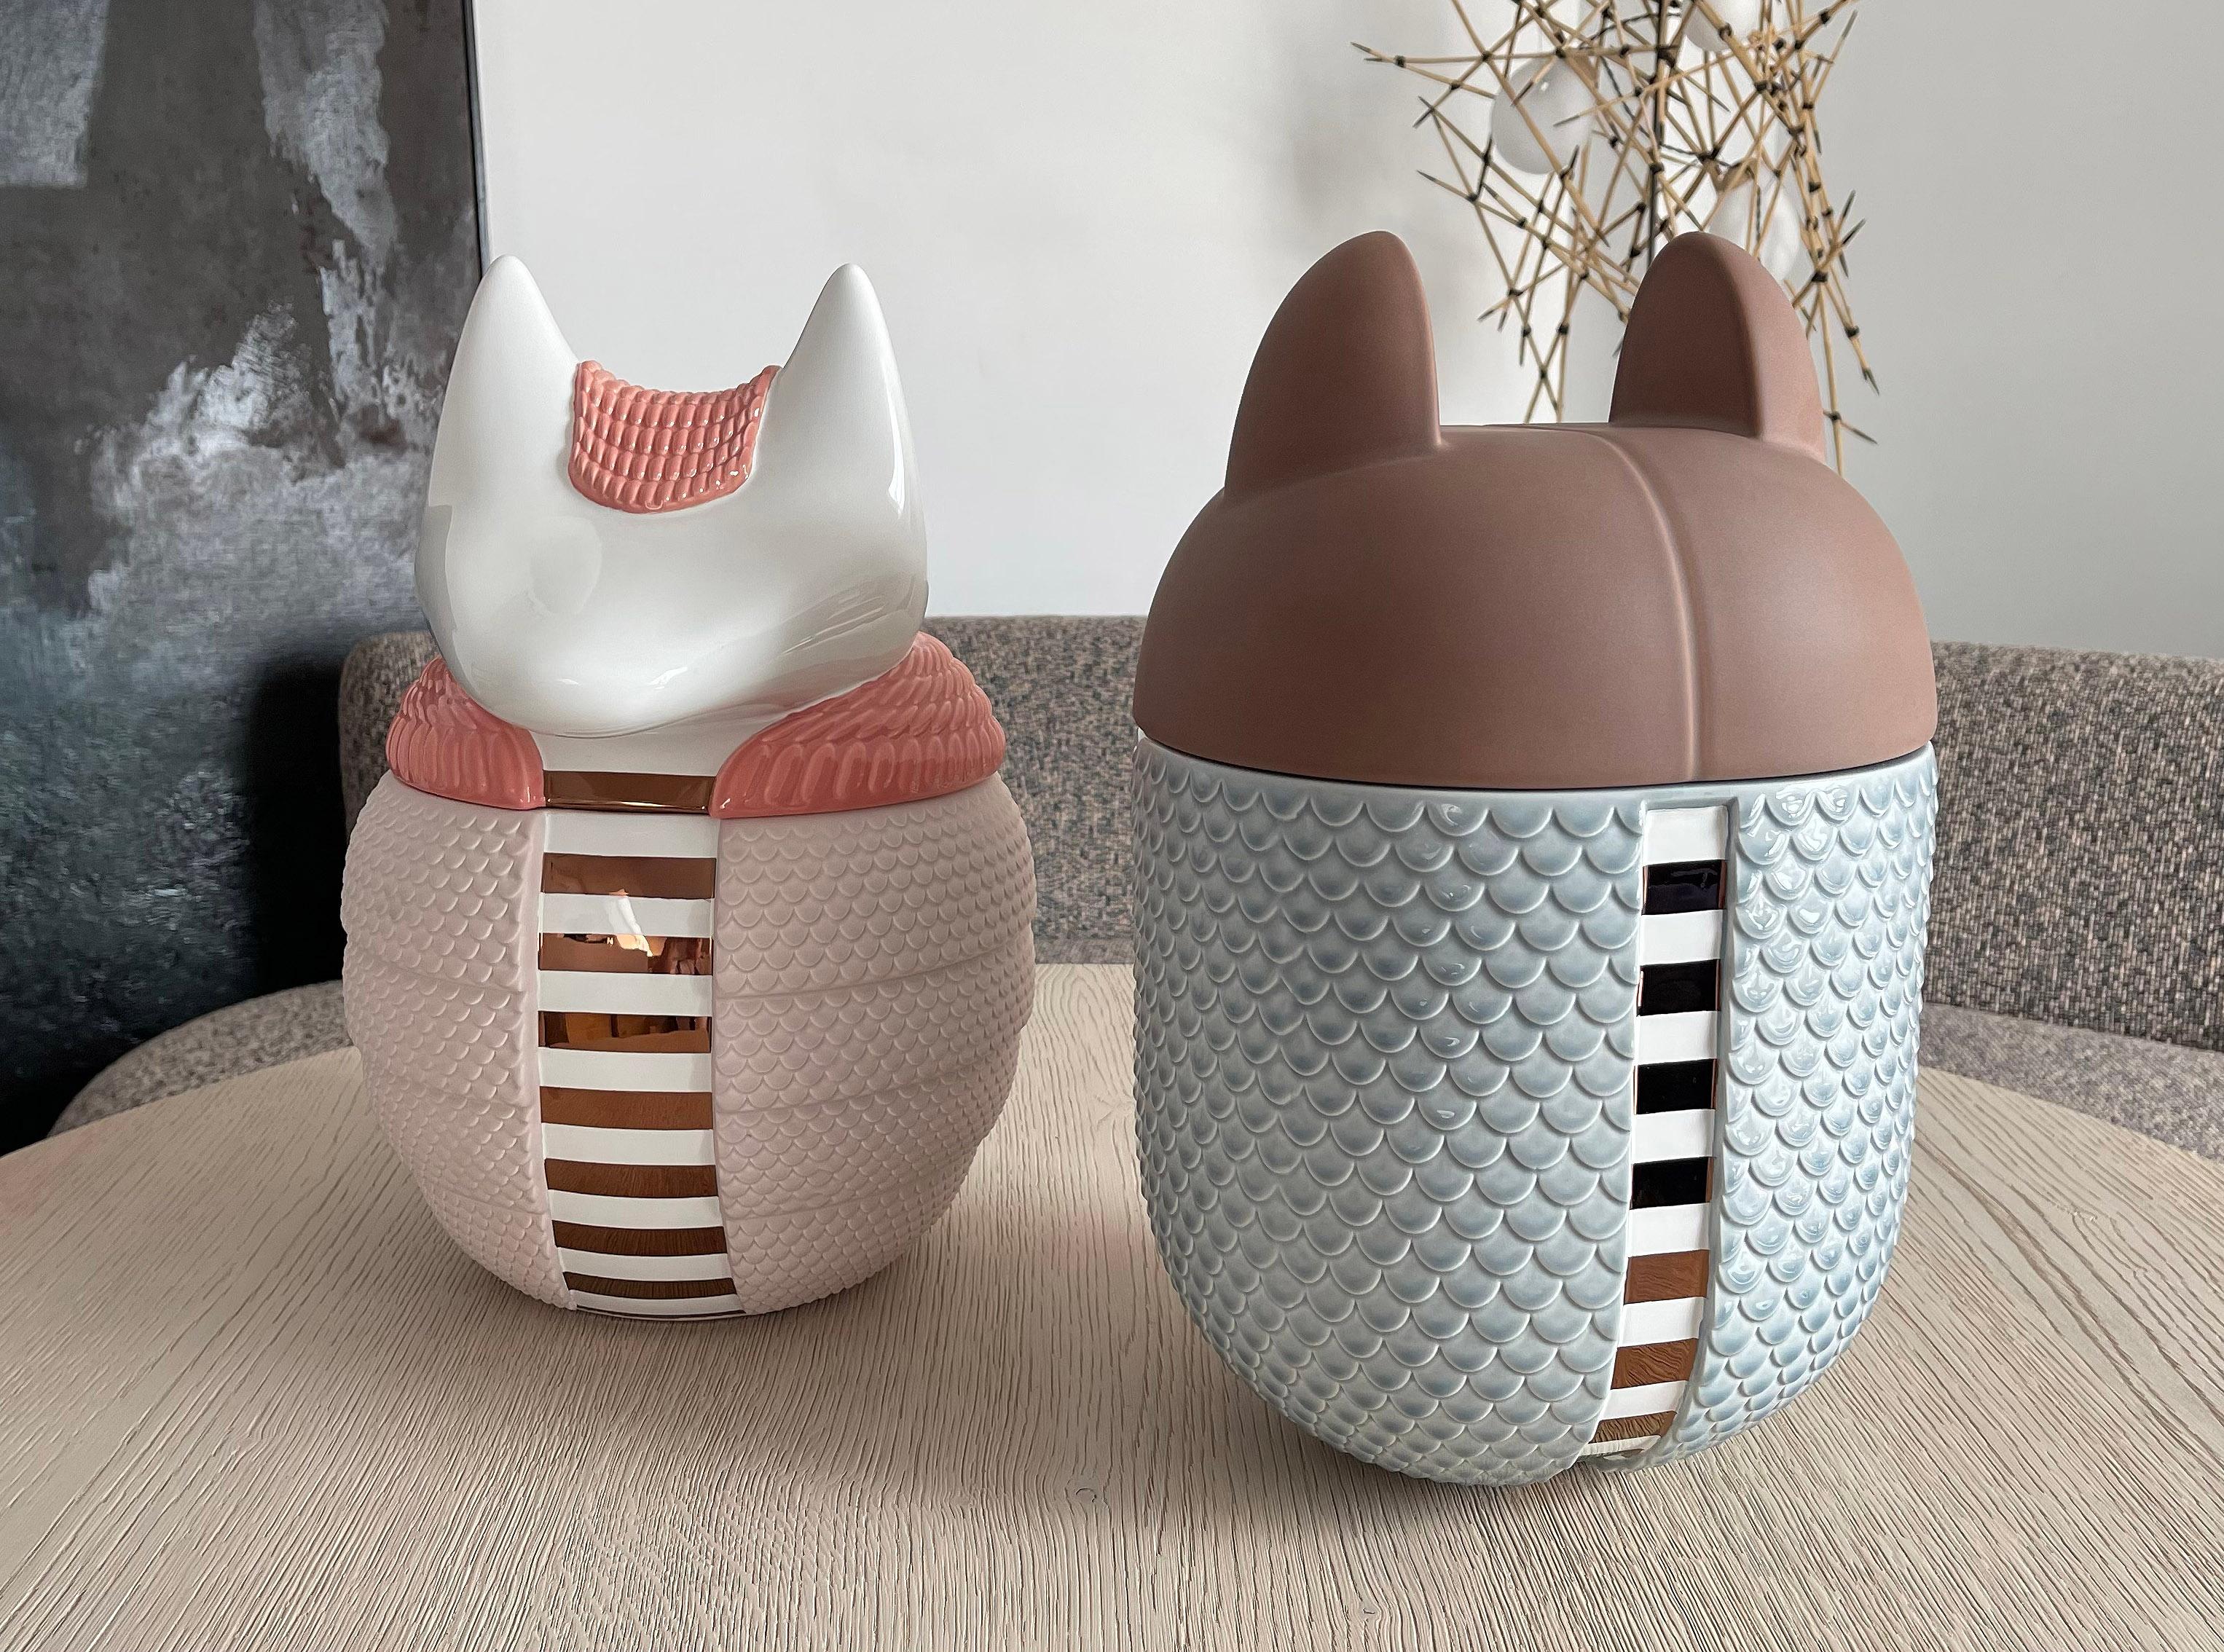 Set of 2 Ceramic Vases / Containers - Animalità Khepri and Loricato by Elena Salmistraro for Bosa

Khepri and loricato designed by Elena Salmistraro for Bosa are armadillo shaped containers / vases in ceramic enriched with precious metals, with a